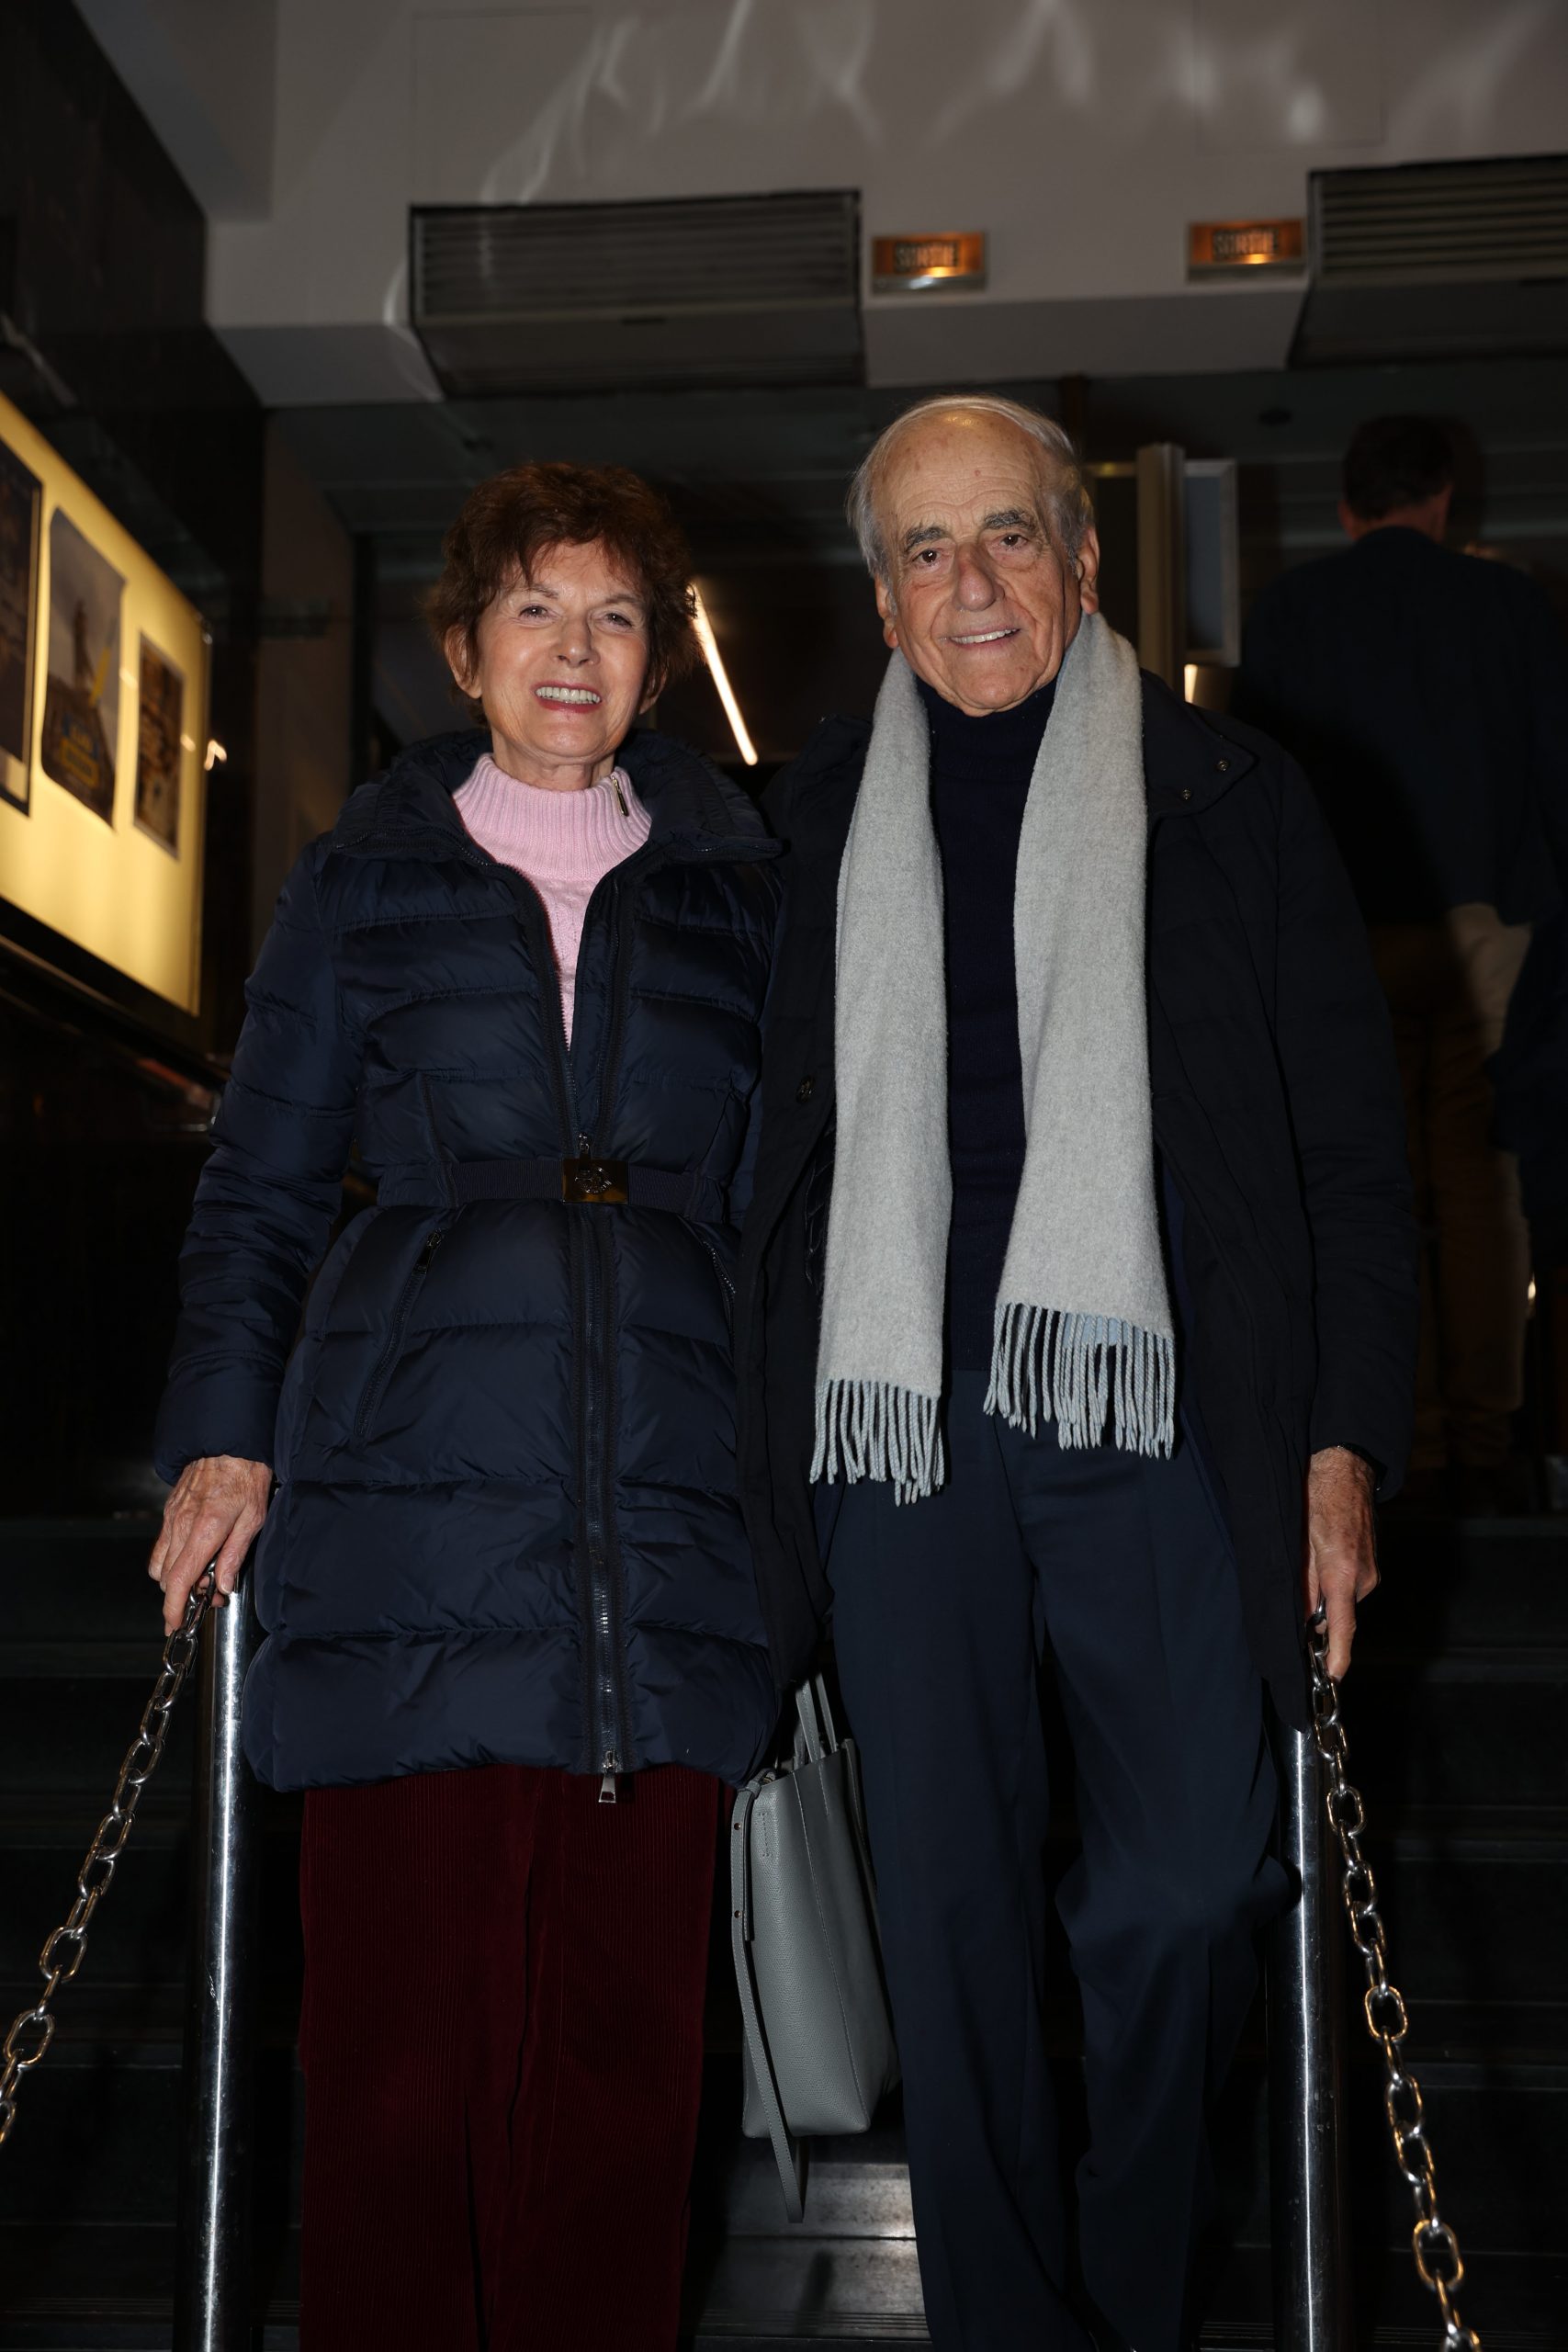 Jean-Pierre Elkabbach and his wife Nicole Avril at the preview of BHL's film "Slava Ukraini" on 6 February 2023 at the Balzac. Photo: Igor Shabalin